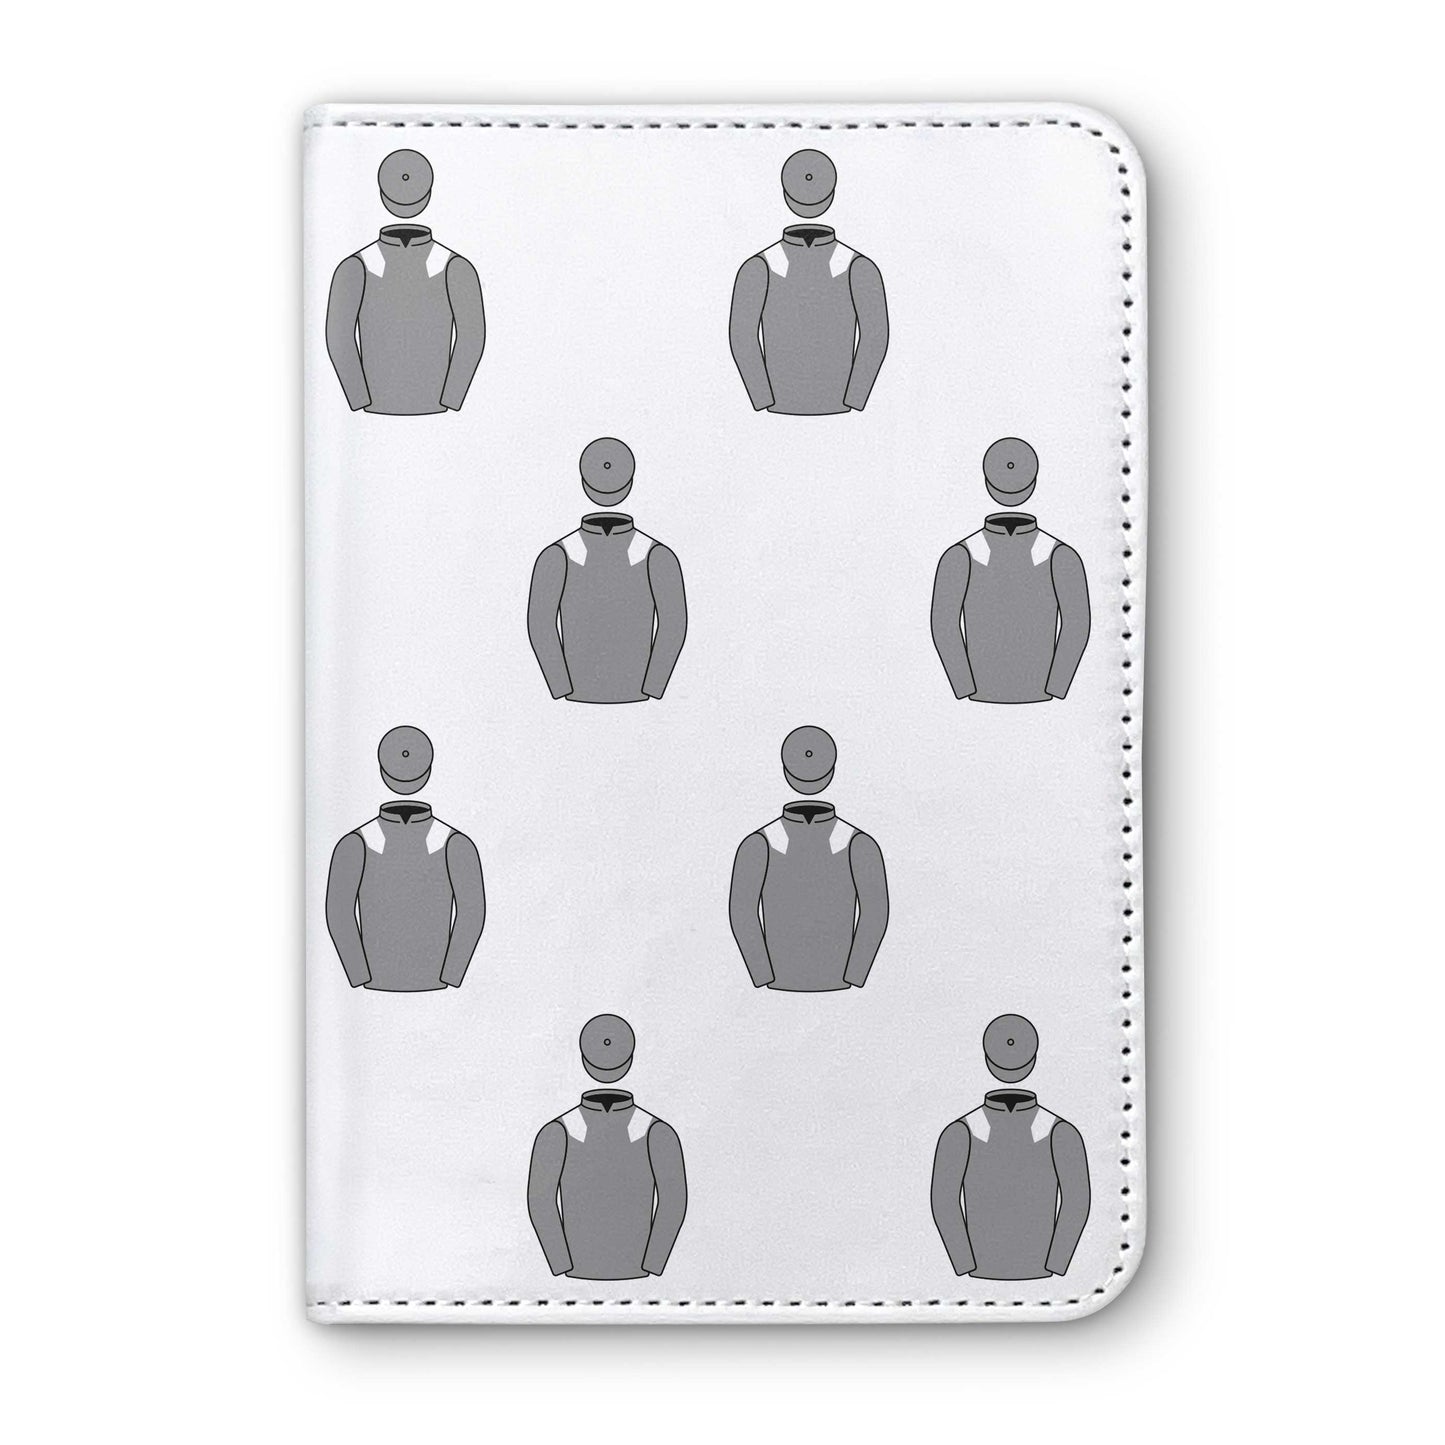 Mr And Mrs R Kelvin-Hughes Horse Racing Passport Holder - Hacked Up Horse Racing Gifts